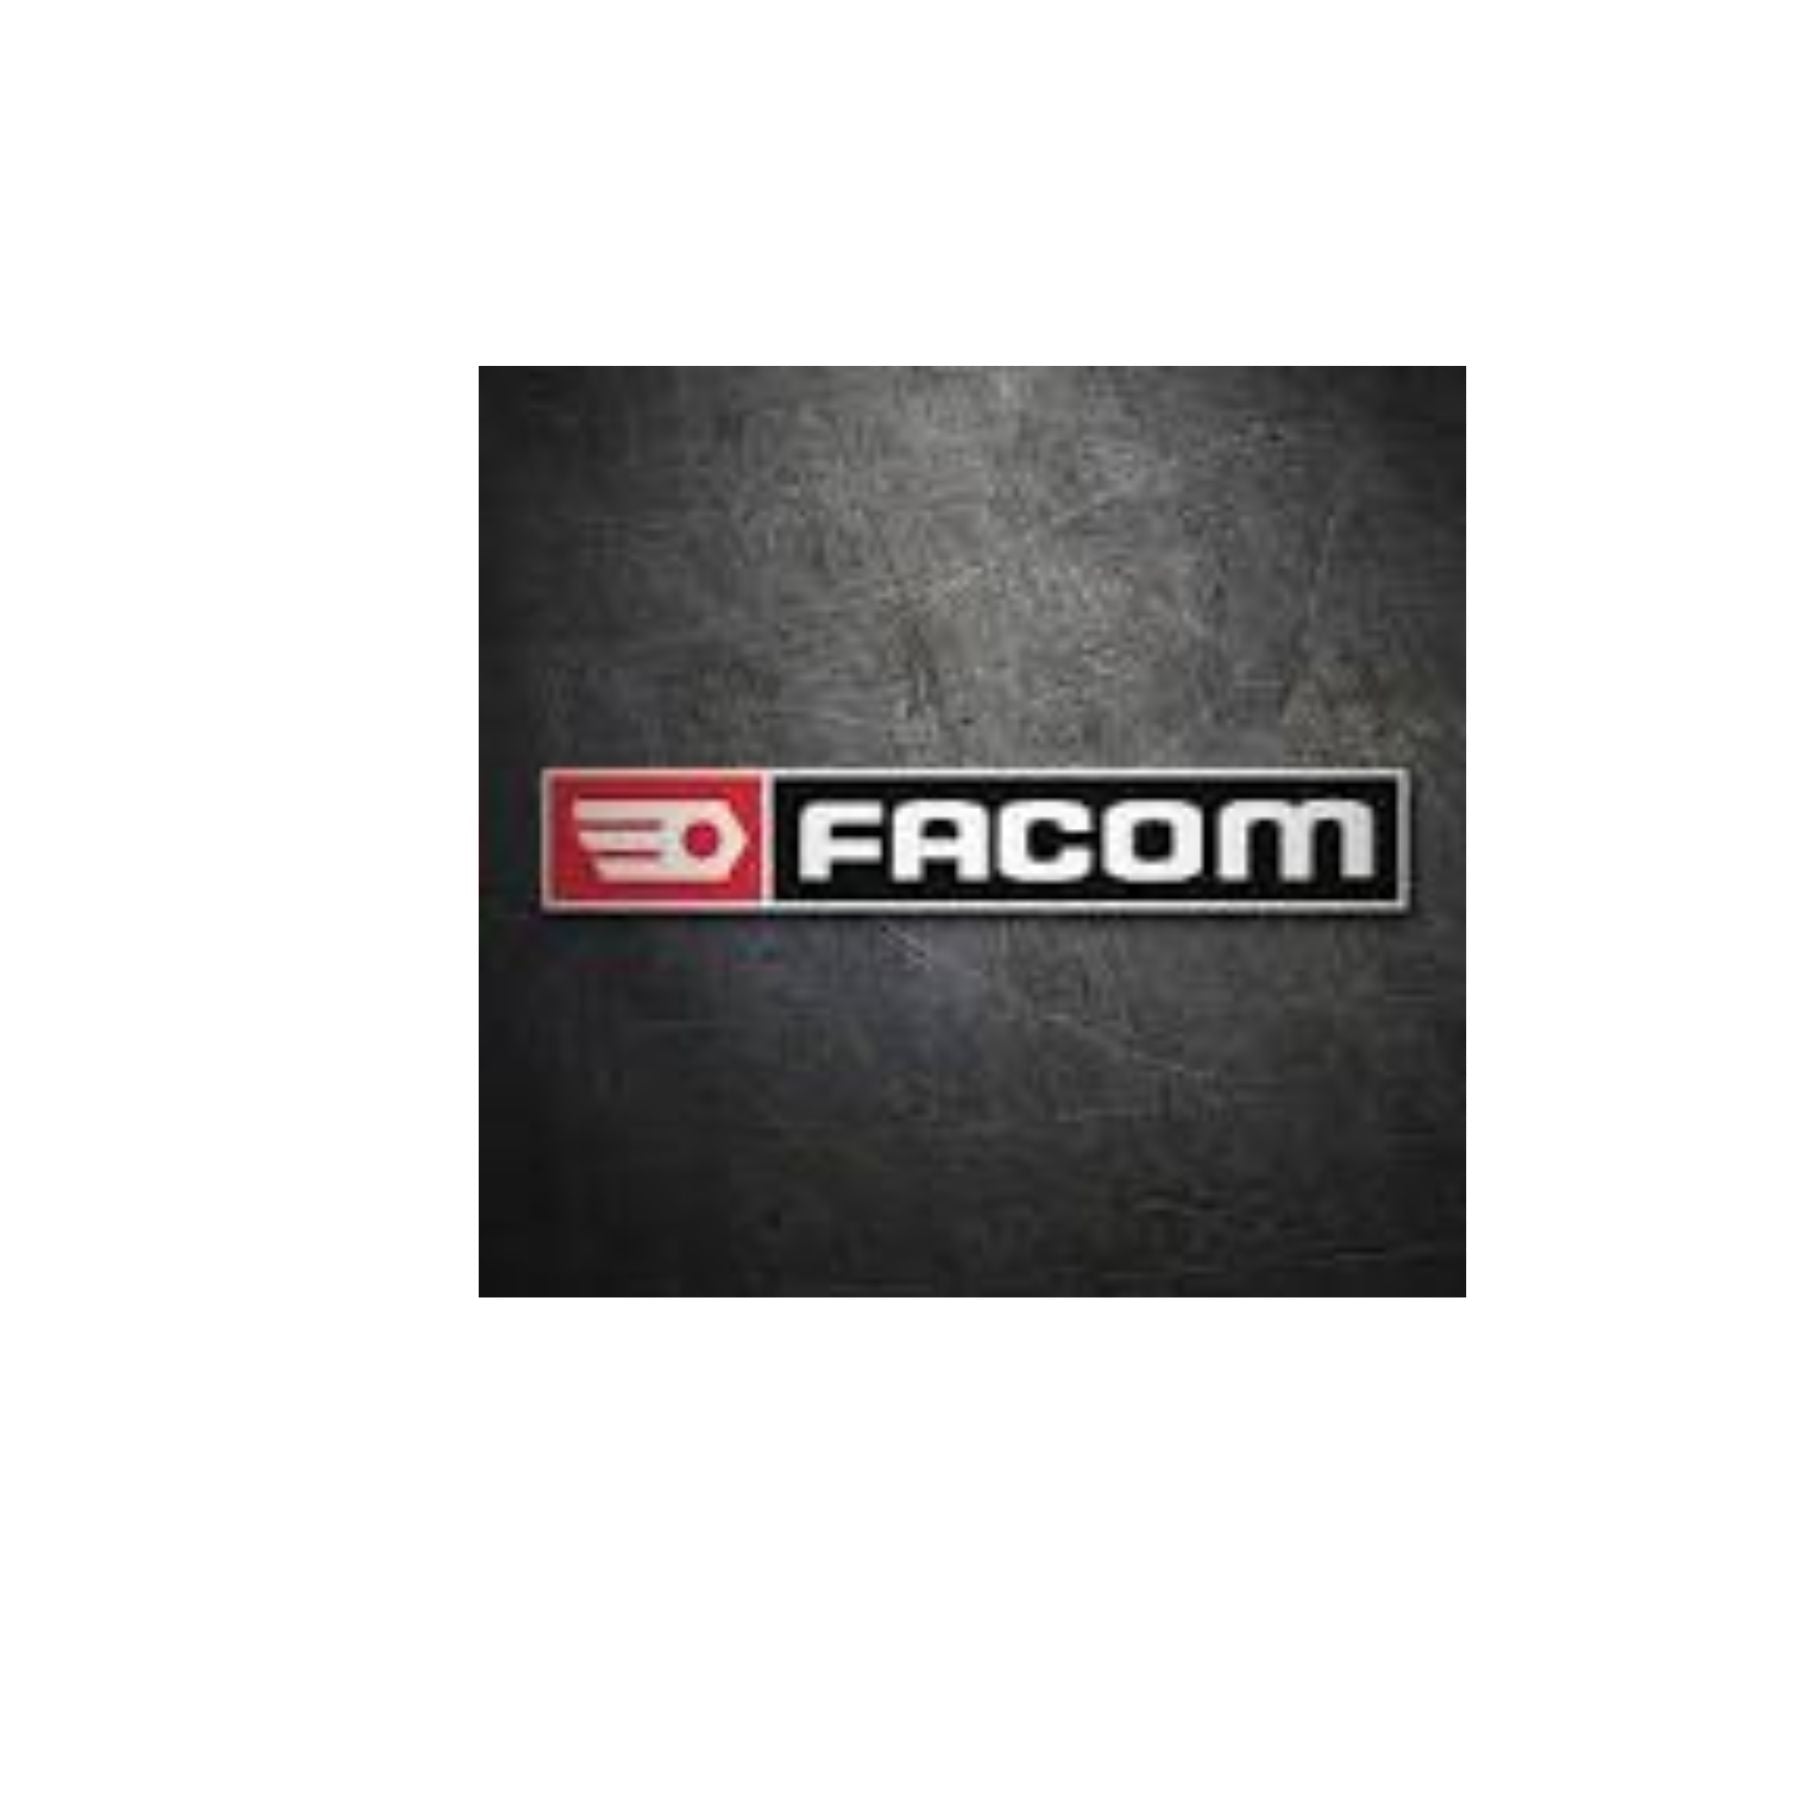 Facom E.306A340S Digital Electronic Torque Wrenches with Ratchet